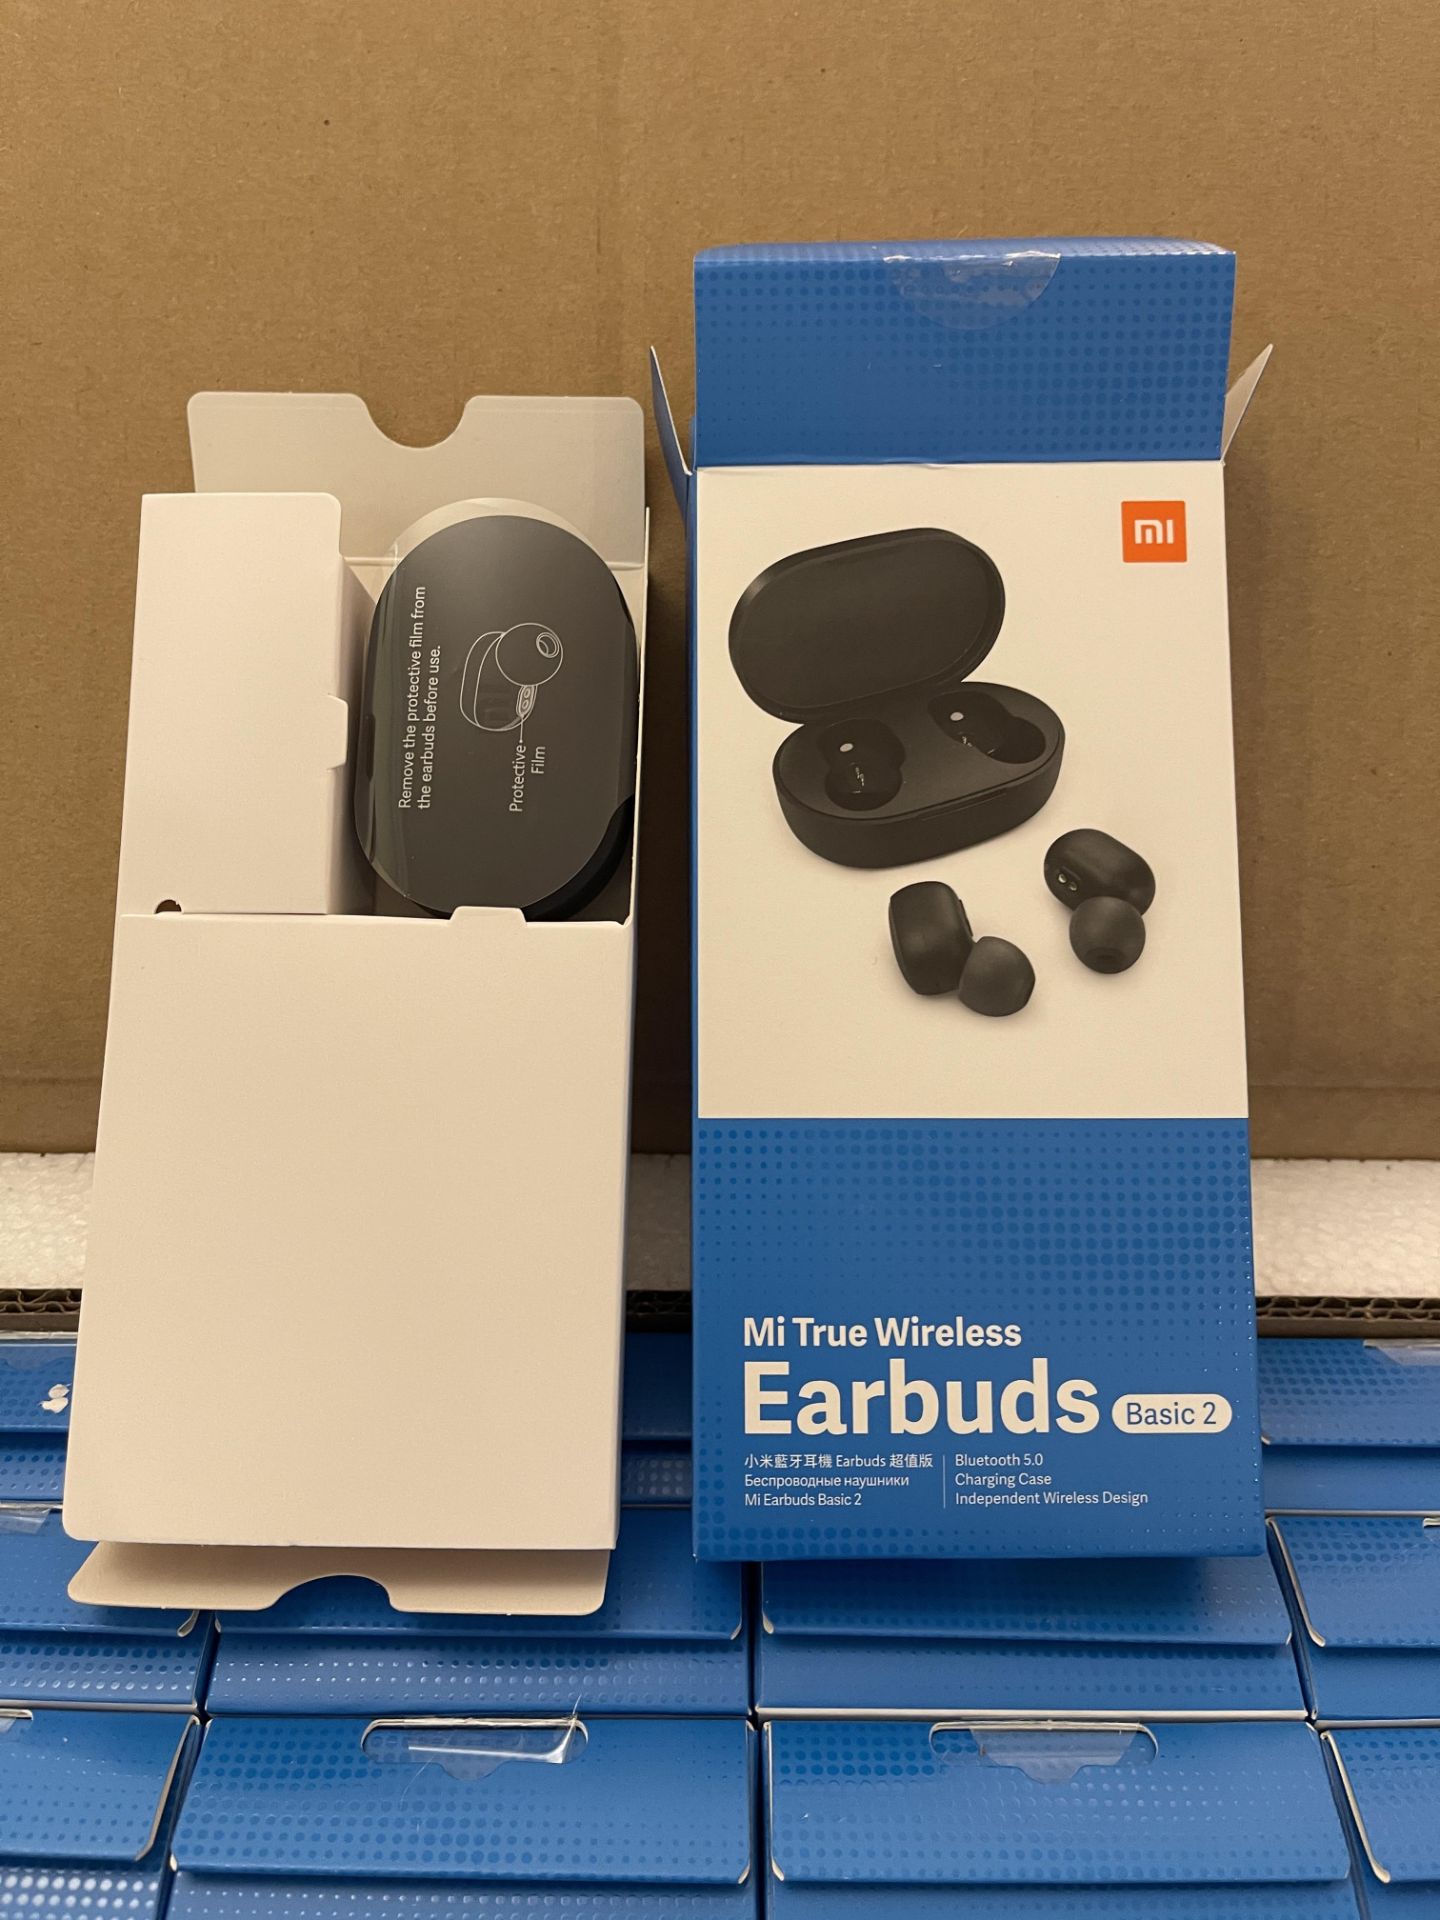 112: Mi True Wireless Earbuds with Charging Case RRP £14.99 - Brand New - Image 2 of 19